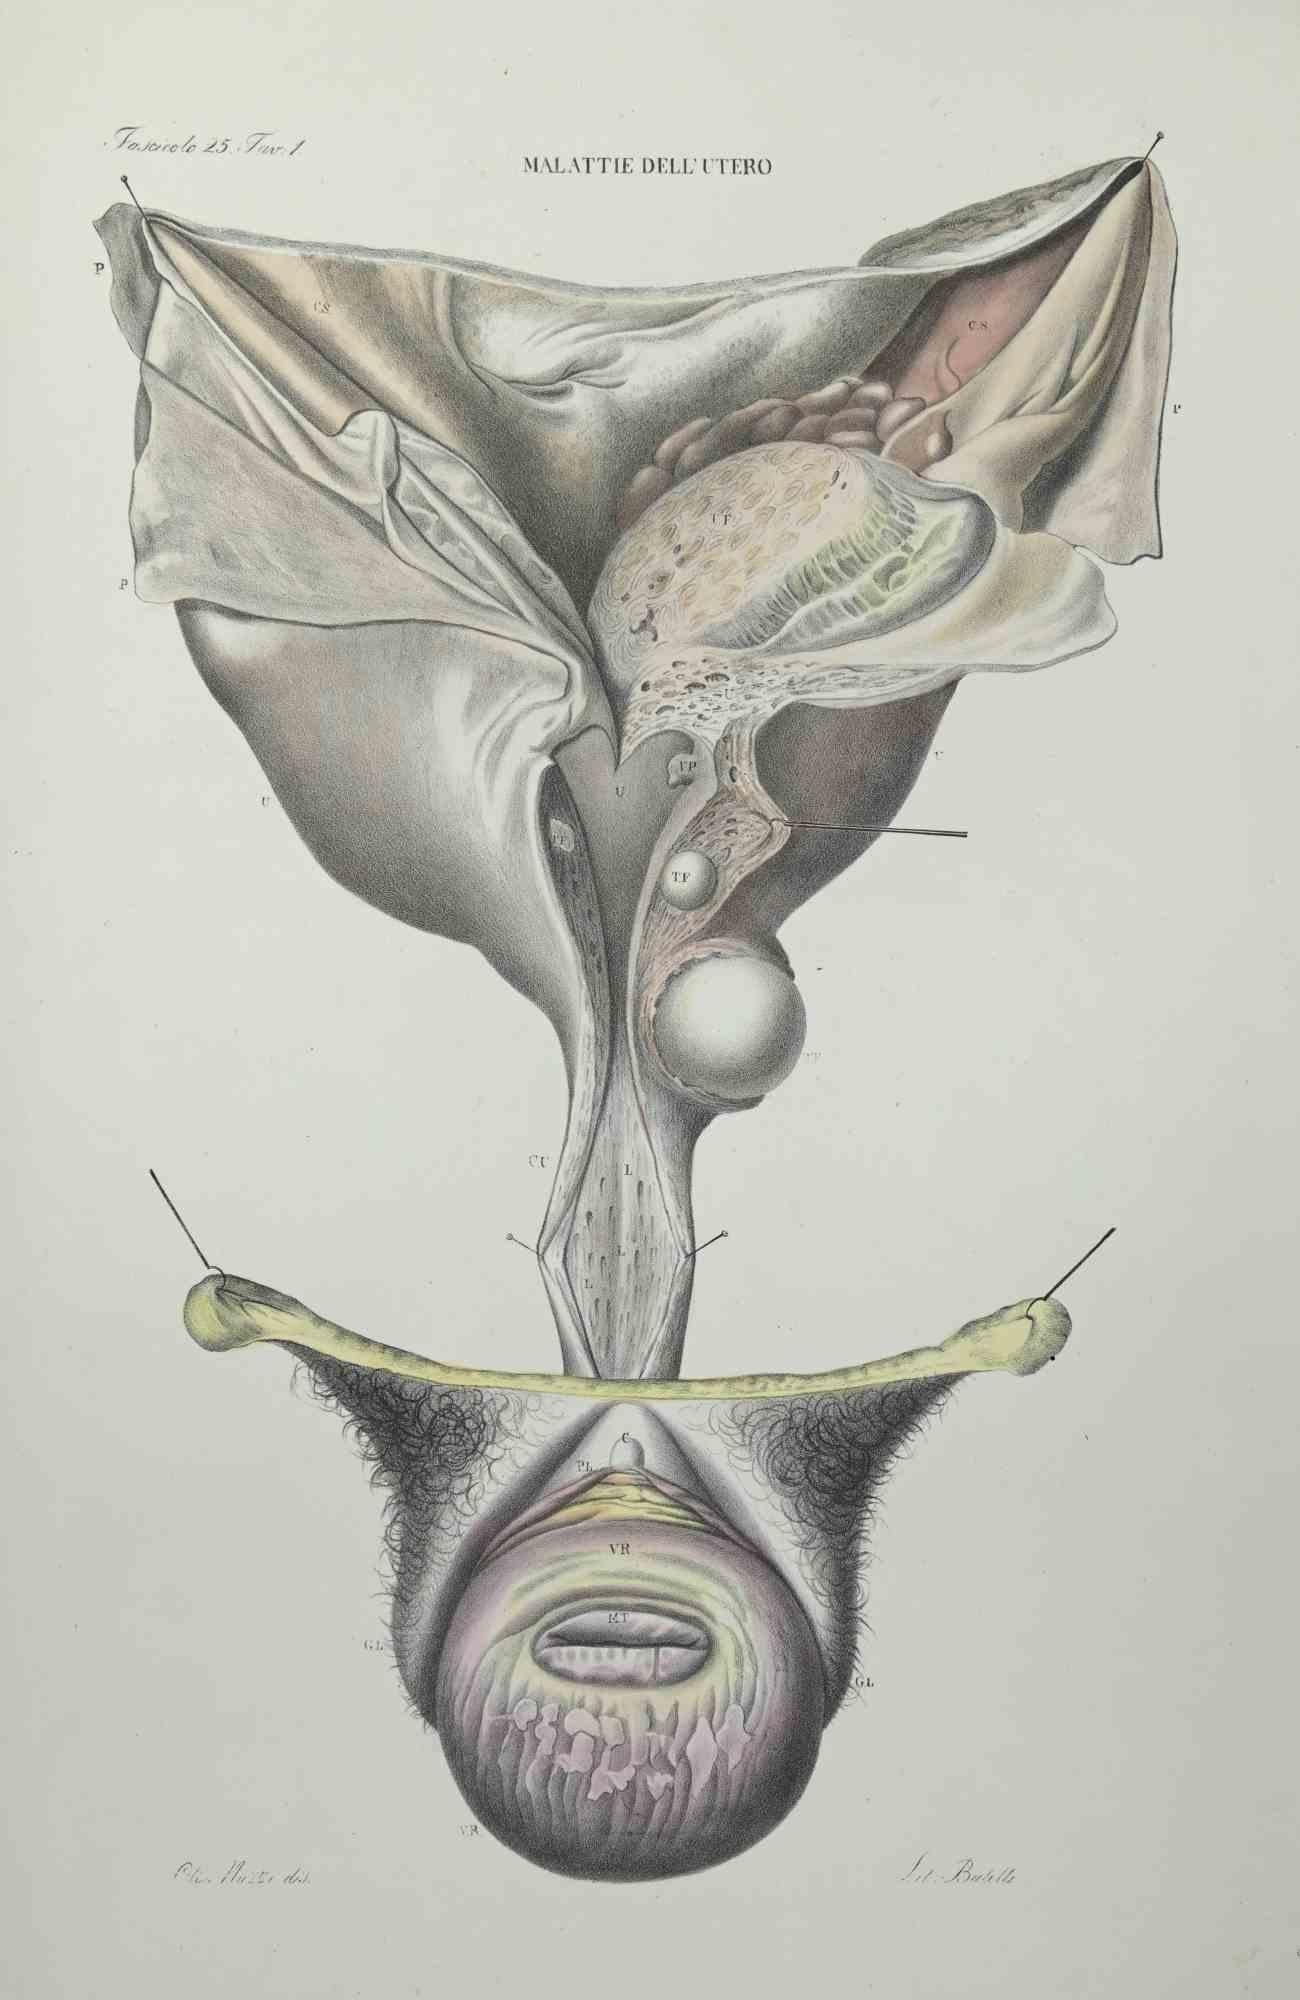 Uterus Diseases is a lithograph hand colored by Ottavio Muzzi for the edition of Antoine Chazal,Human Anatomy, Printers Batelli and Ridolfi, realized in 1843.
Signed on plate on the lower left margin. 

The artwork belongs to the "Atlante Generale